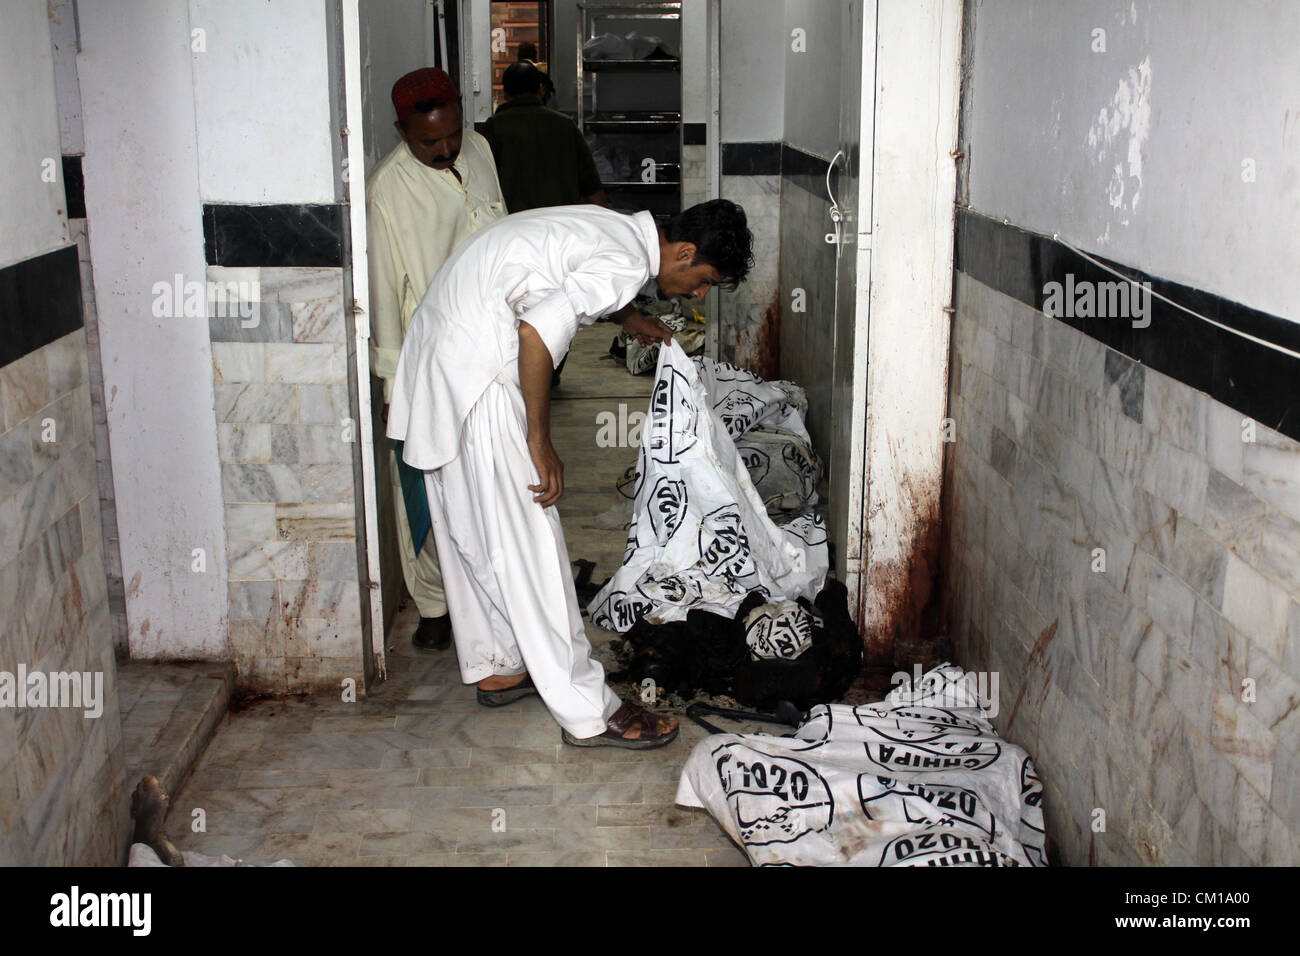 Karachi, Pakistan. 12th September, 2012. Relatives of the burnt factory workers gathered at a hospital morgue to identify their beloveds in Karachi September 12, 2012. Atleast 289 workers were burnt when fire engulfed a garment factory in Karachi. Stock Photo